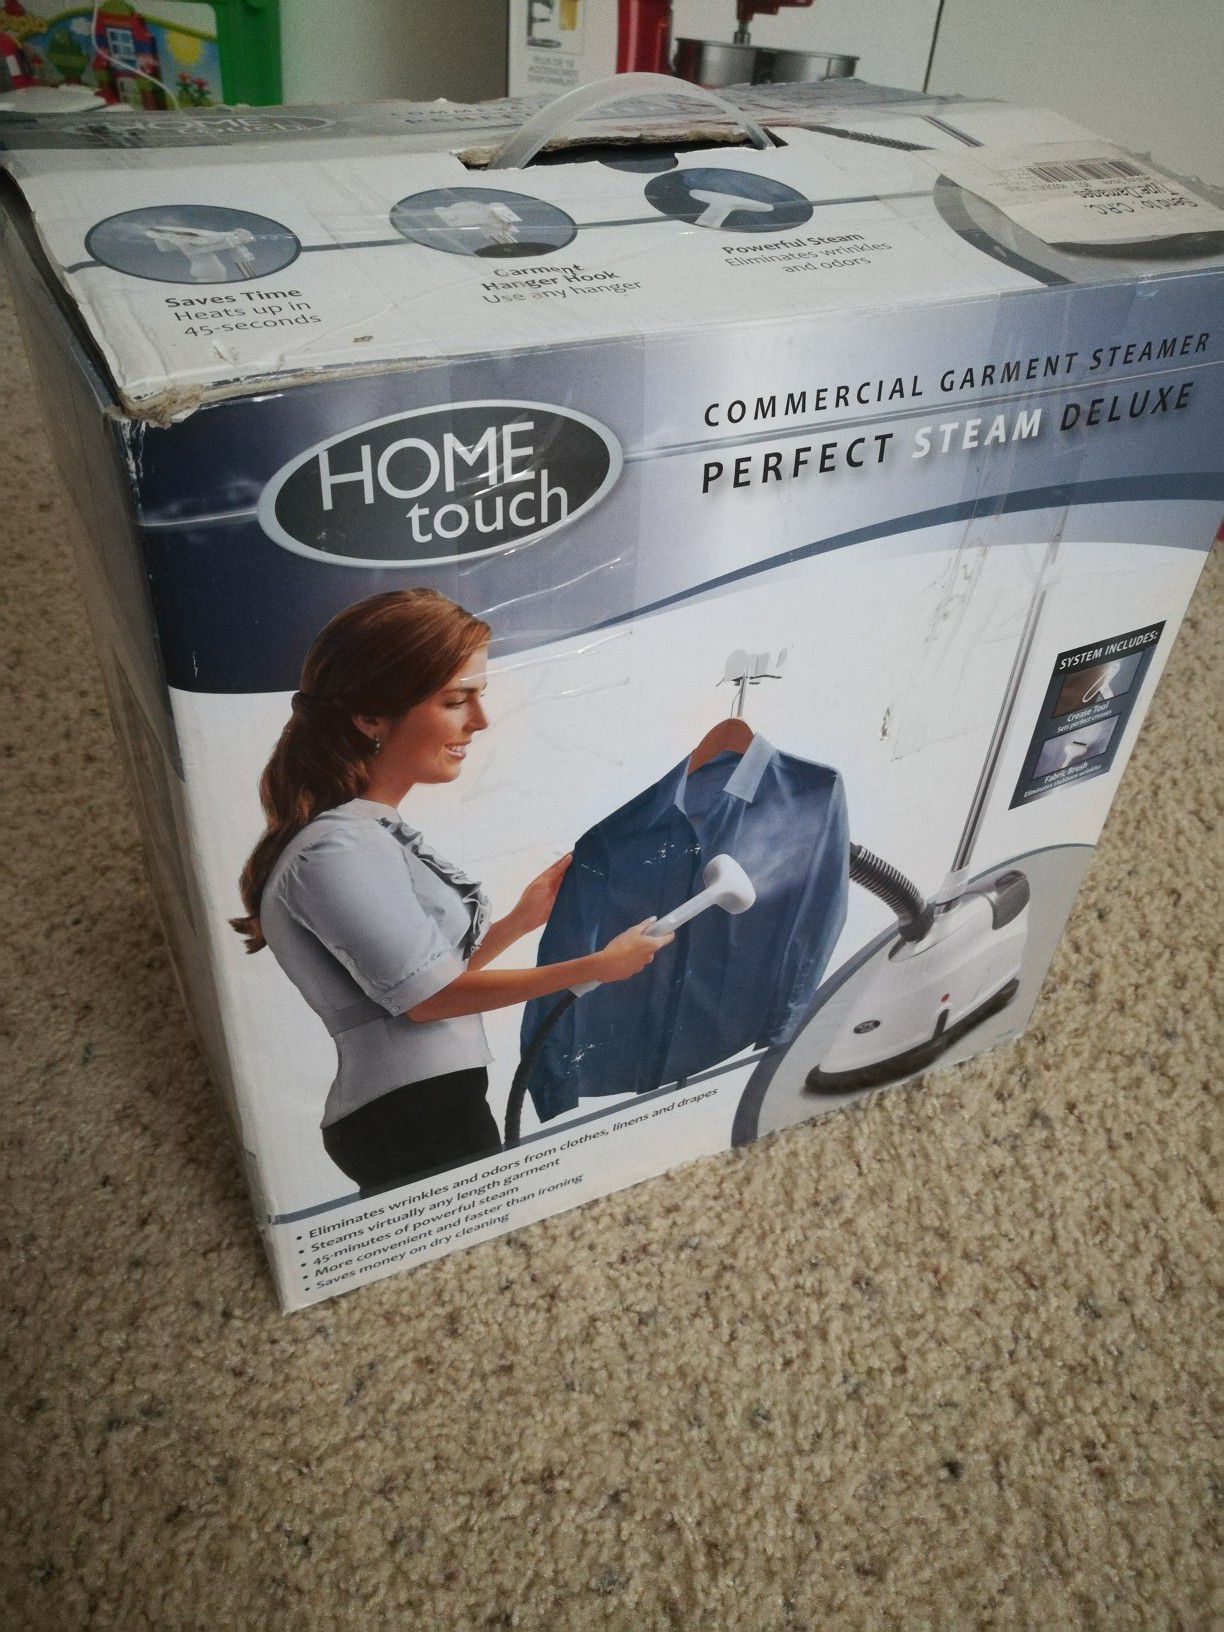 HOME Touch Perfect Steam Deluxe Commercial Garment Steamer